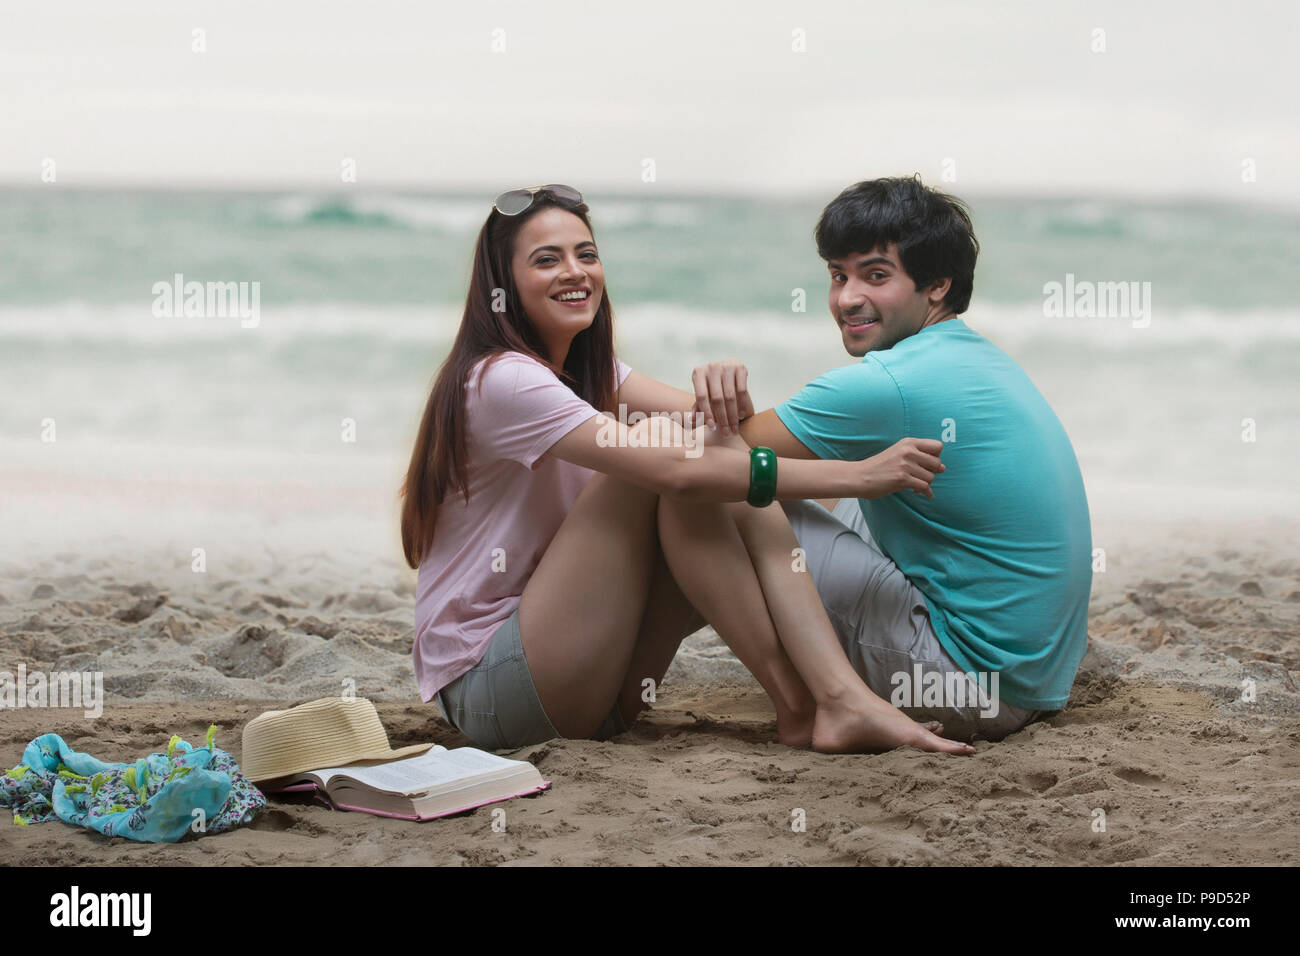 Smiling young couple sitting on beach Banque D'Images